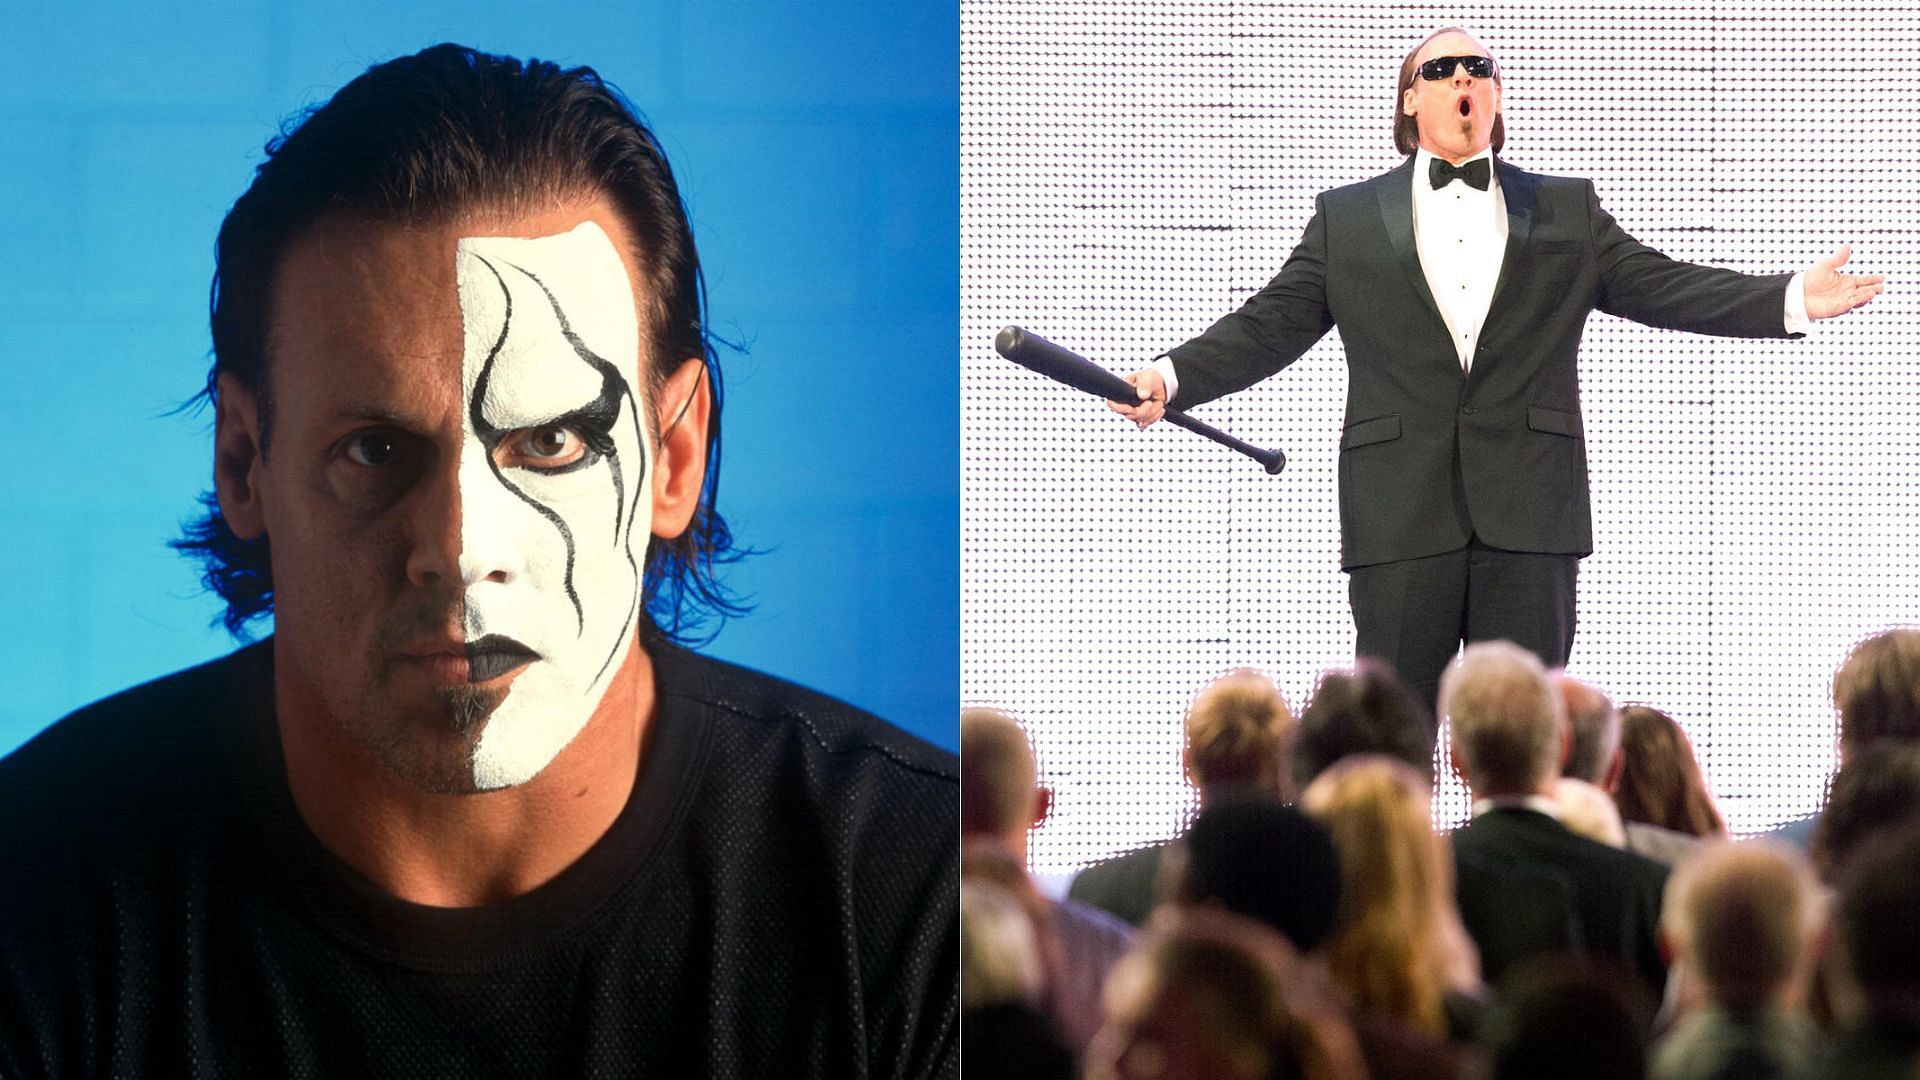 At 64 years old, Sting is one of the oldest active wrestlers in the world